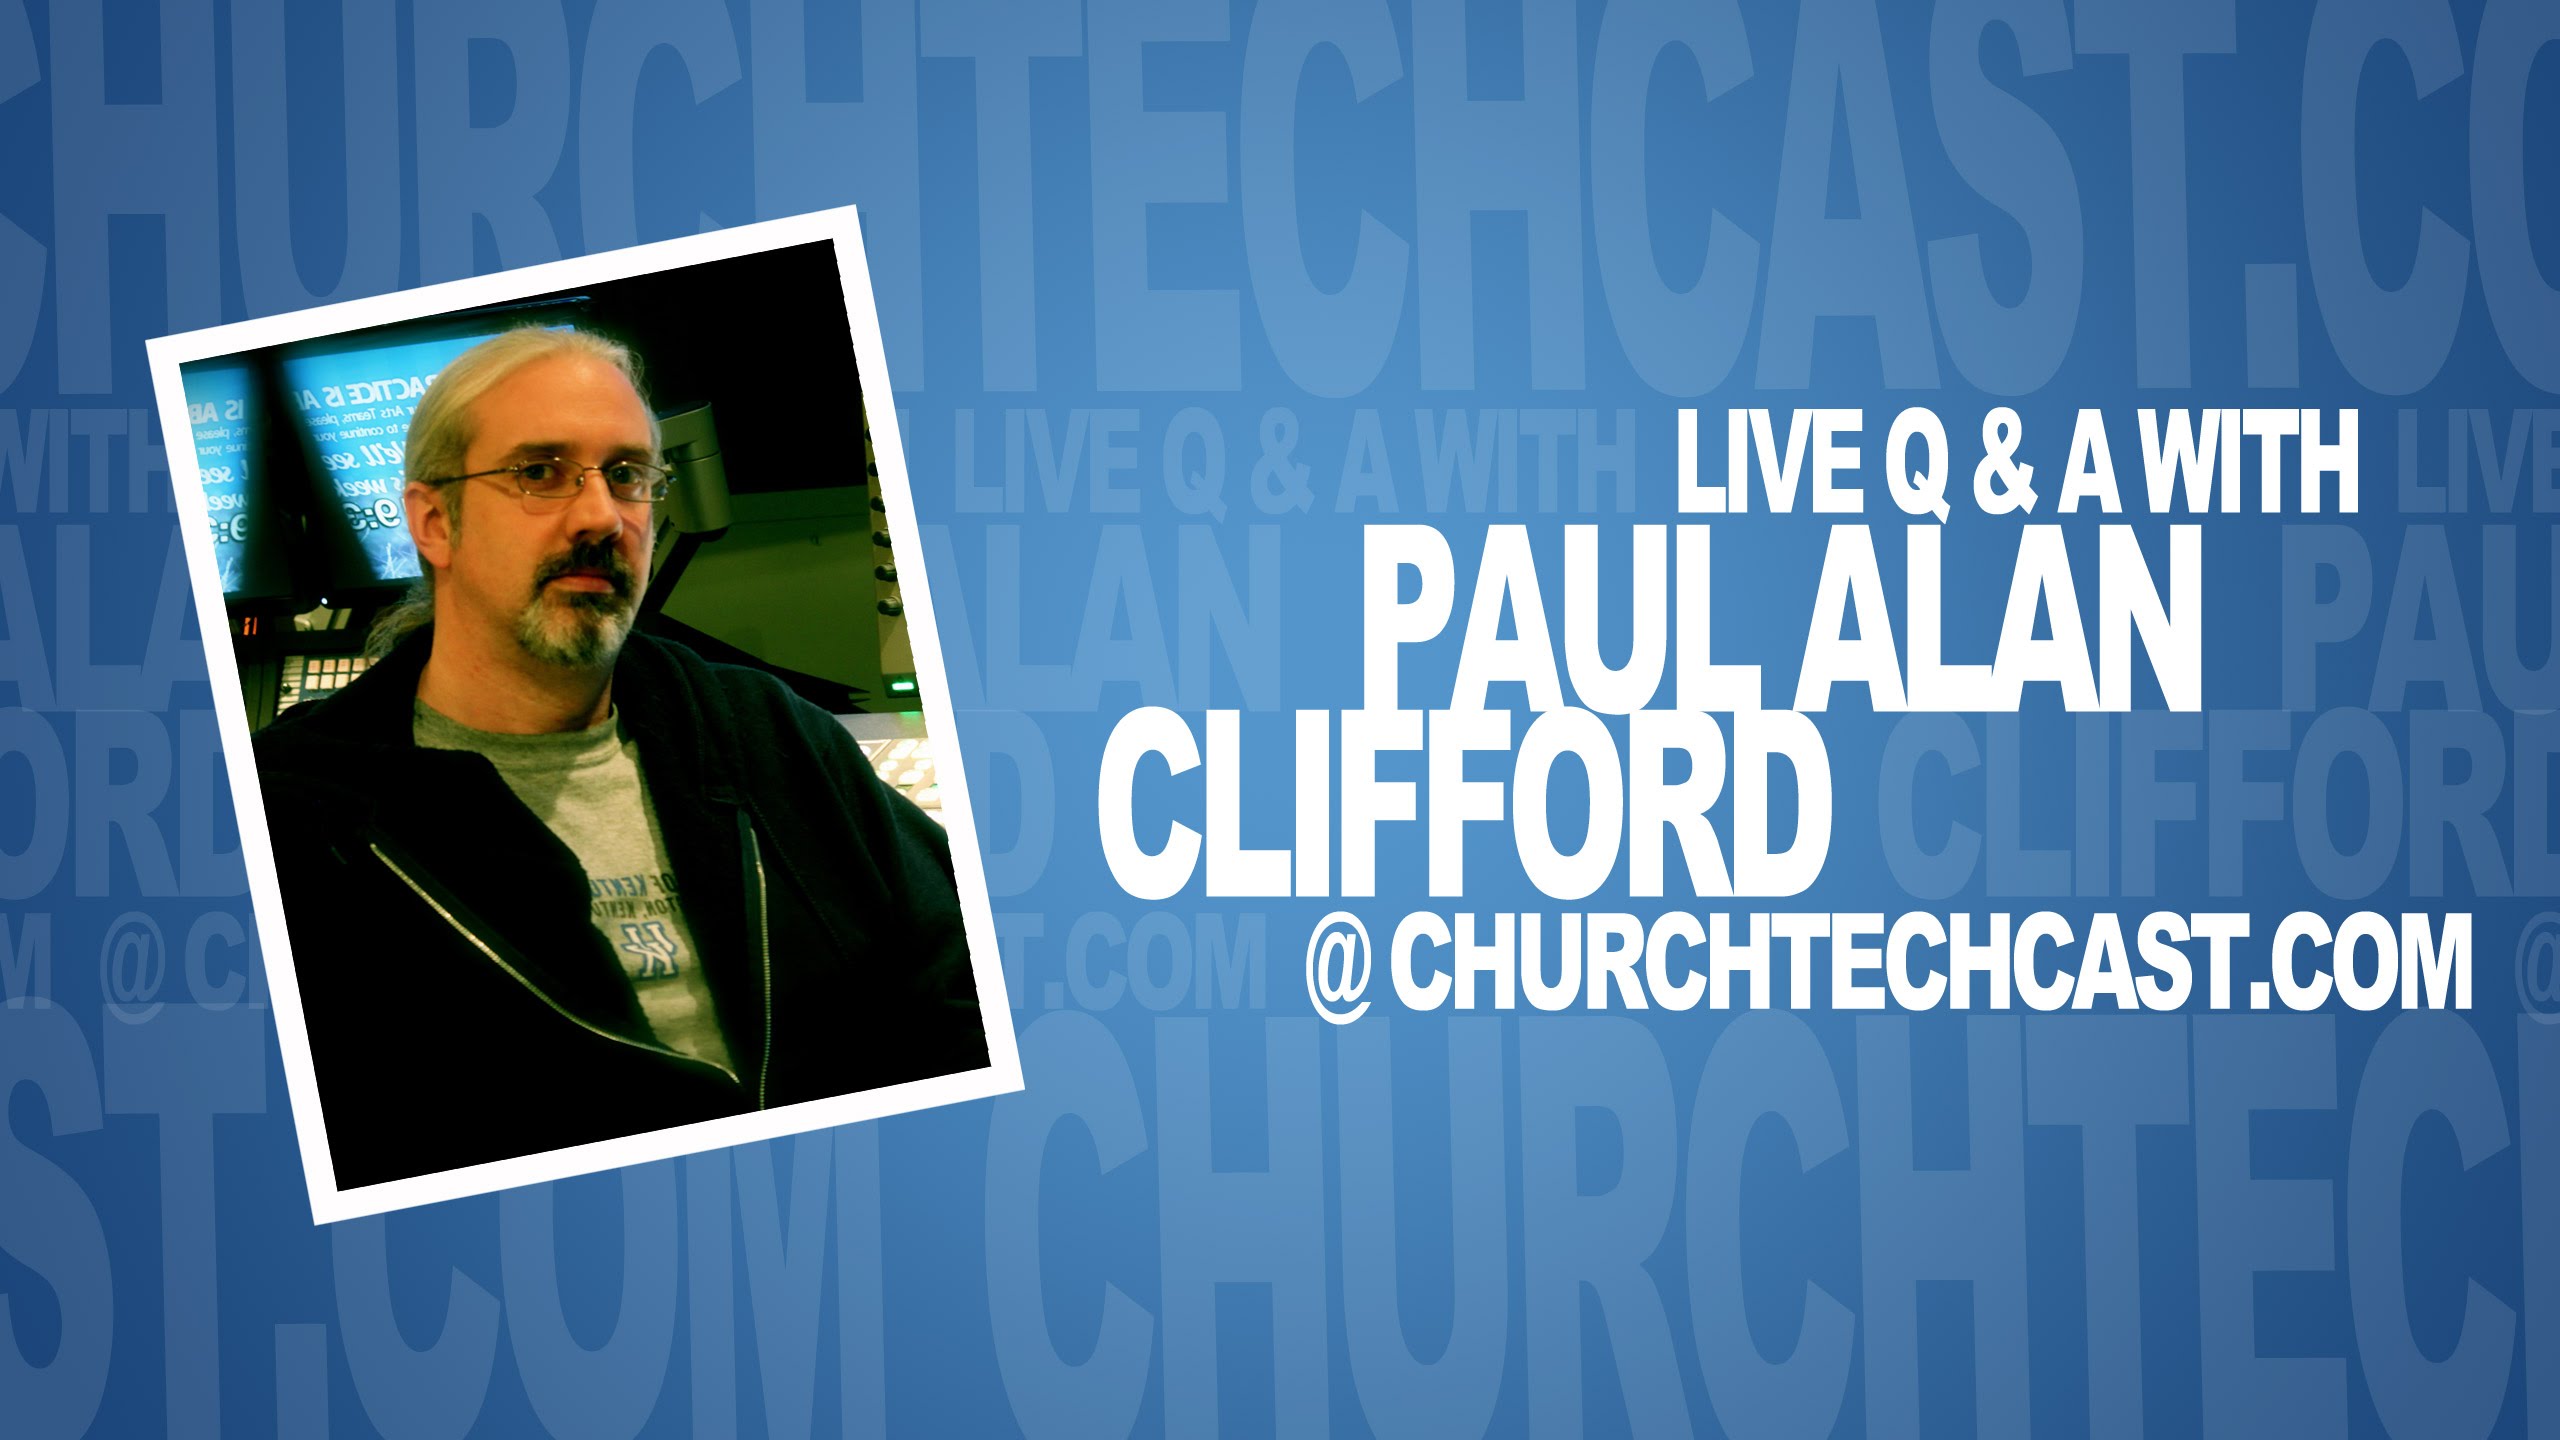 Live streaming upload, Canon cameras, persistent video, and a ProPresenter 5 course | ChurchTechCast